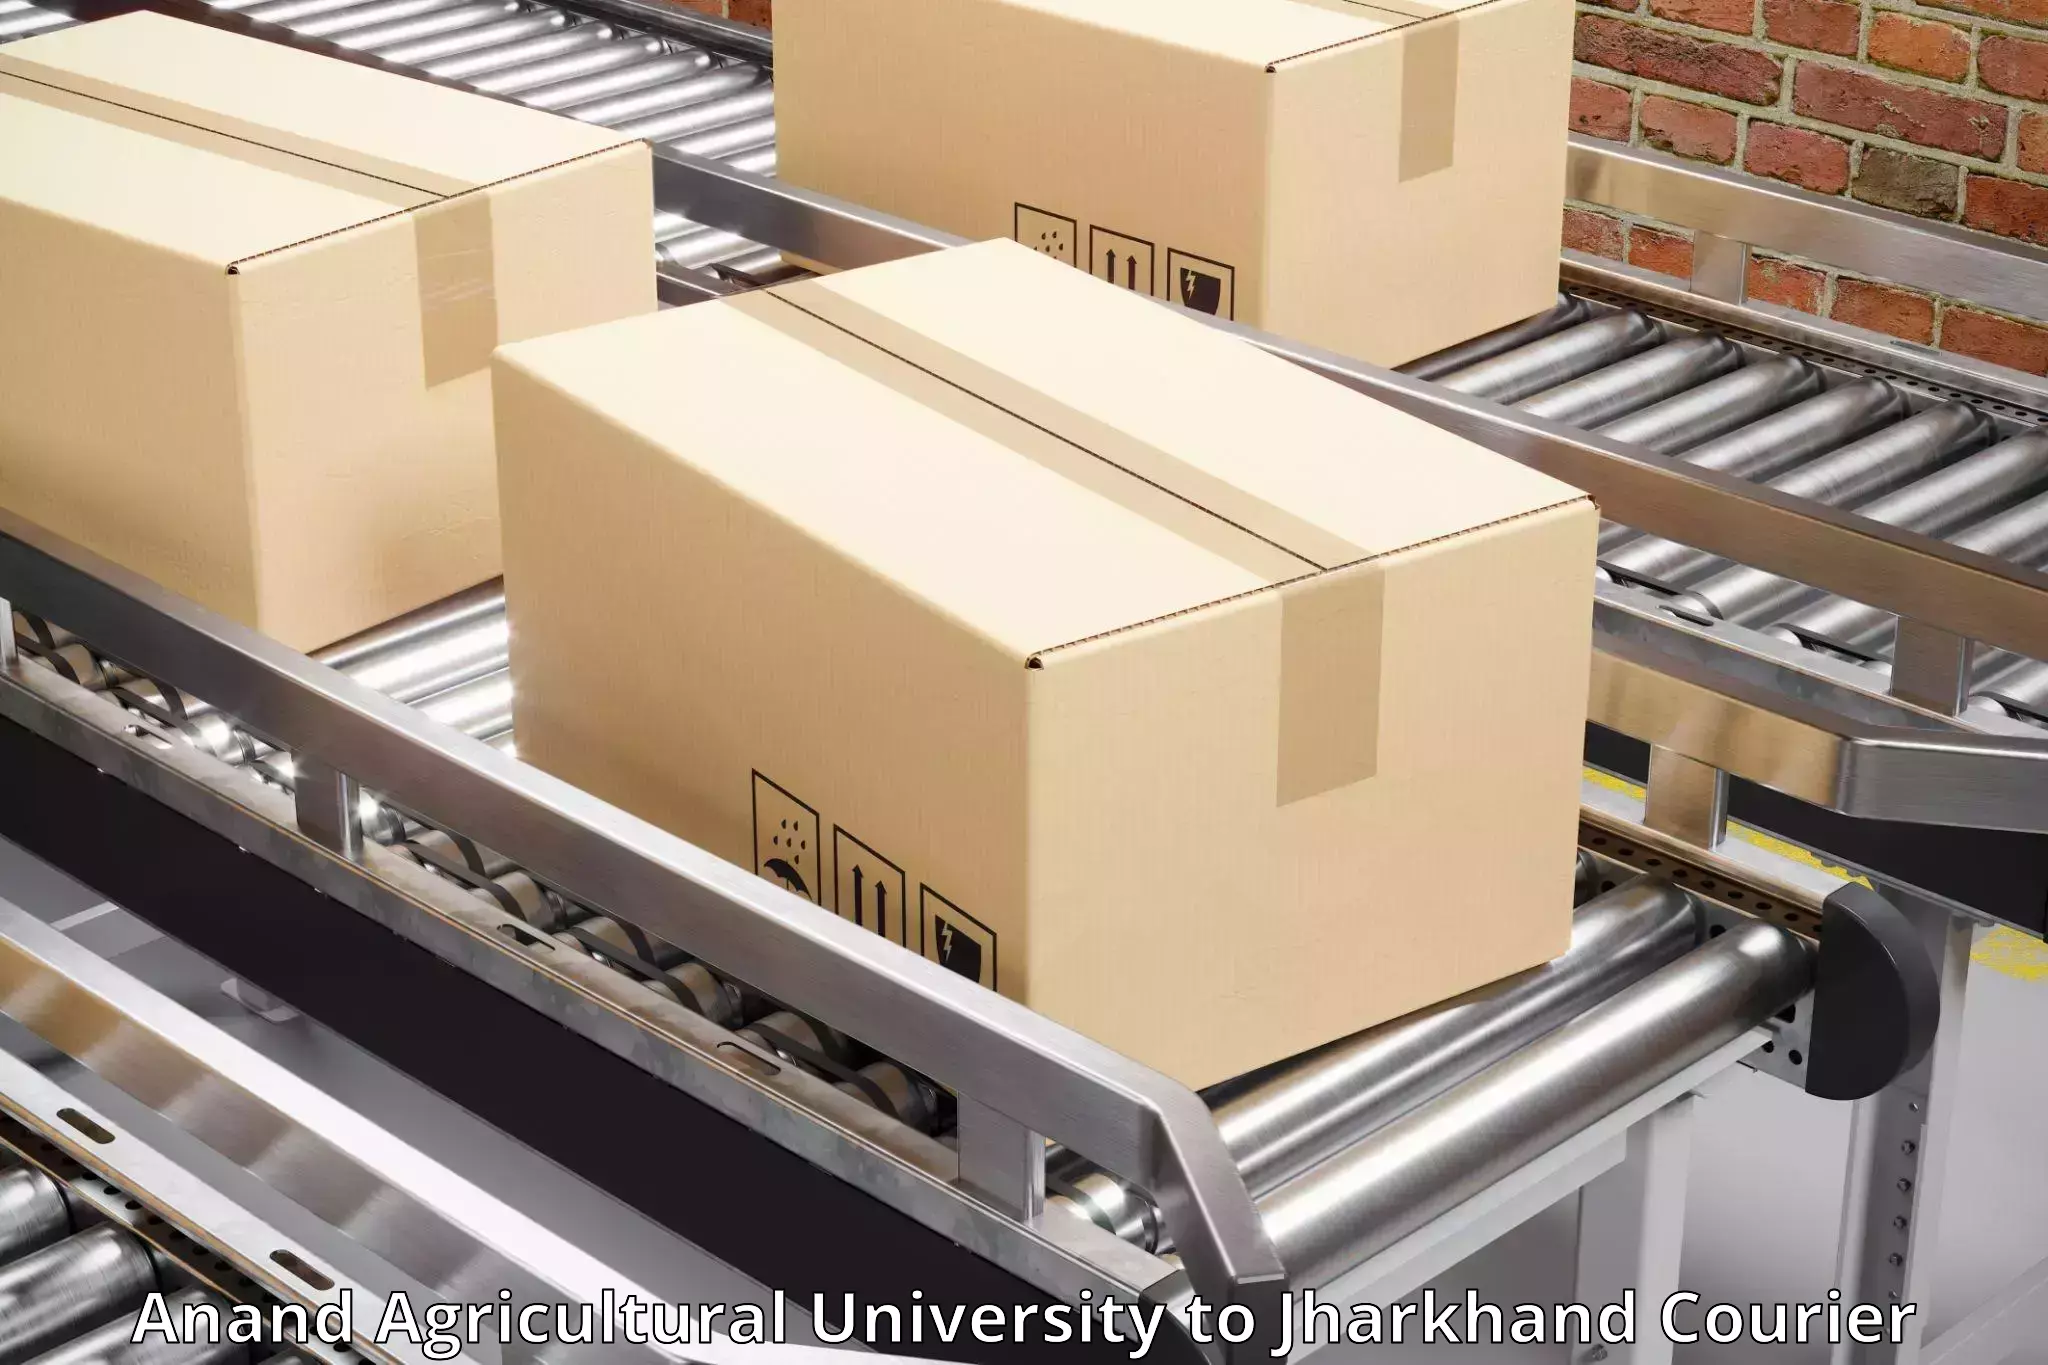 Affordable parcel service Anand Agricultural University to Barki Saria